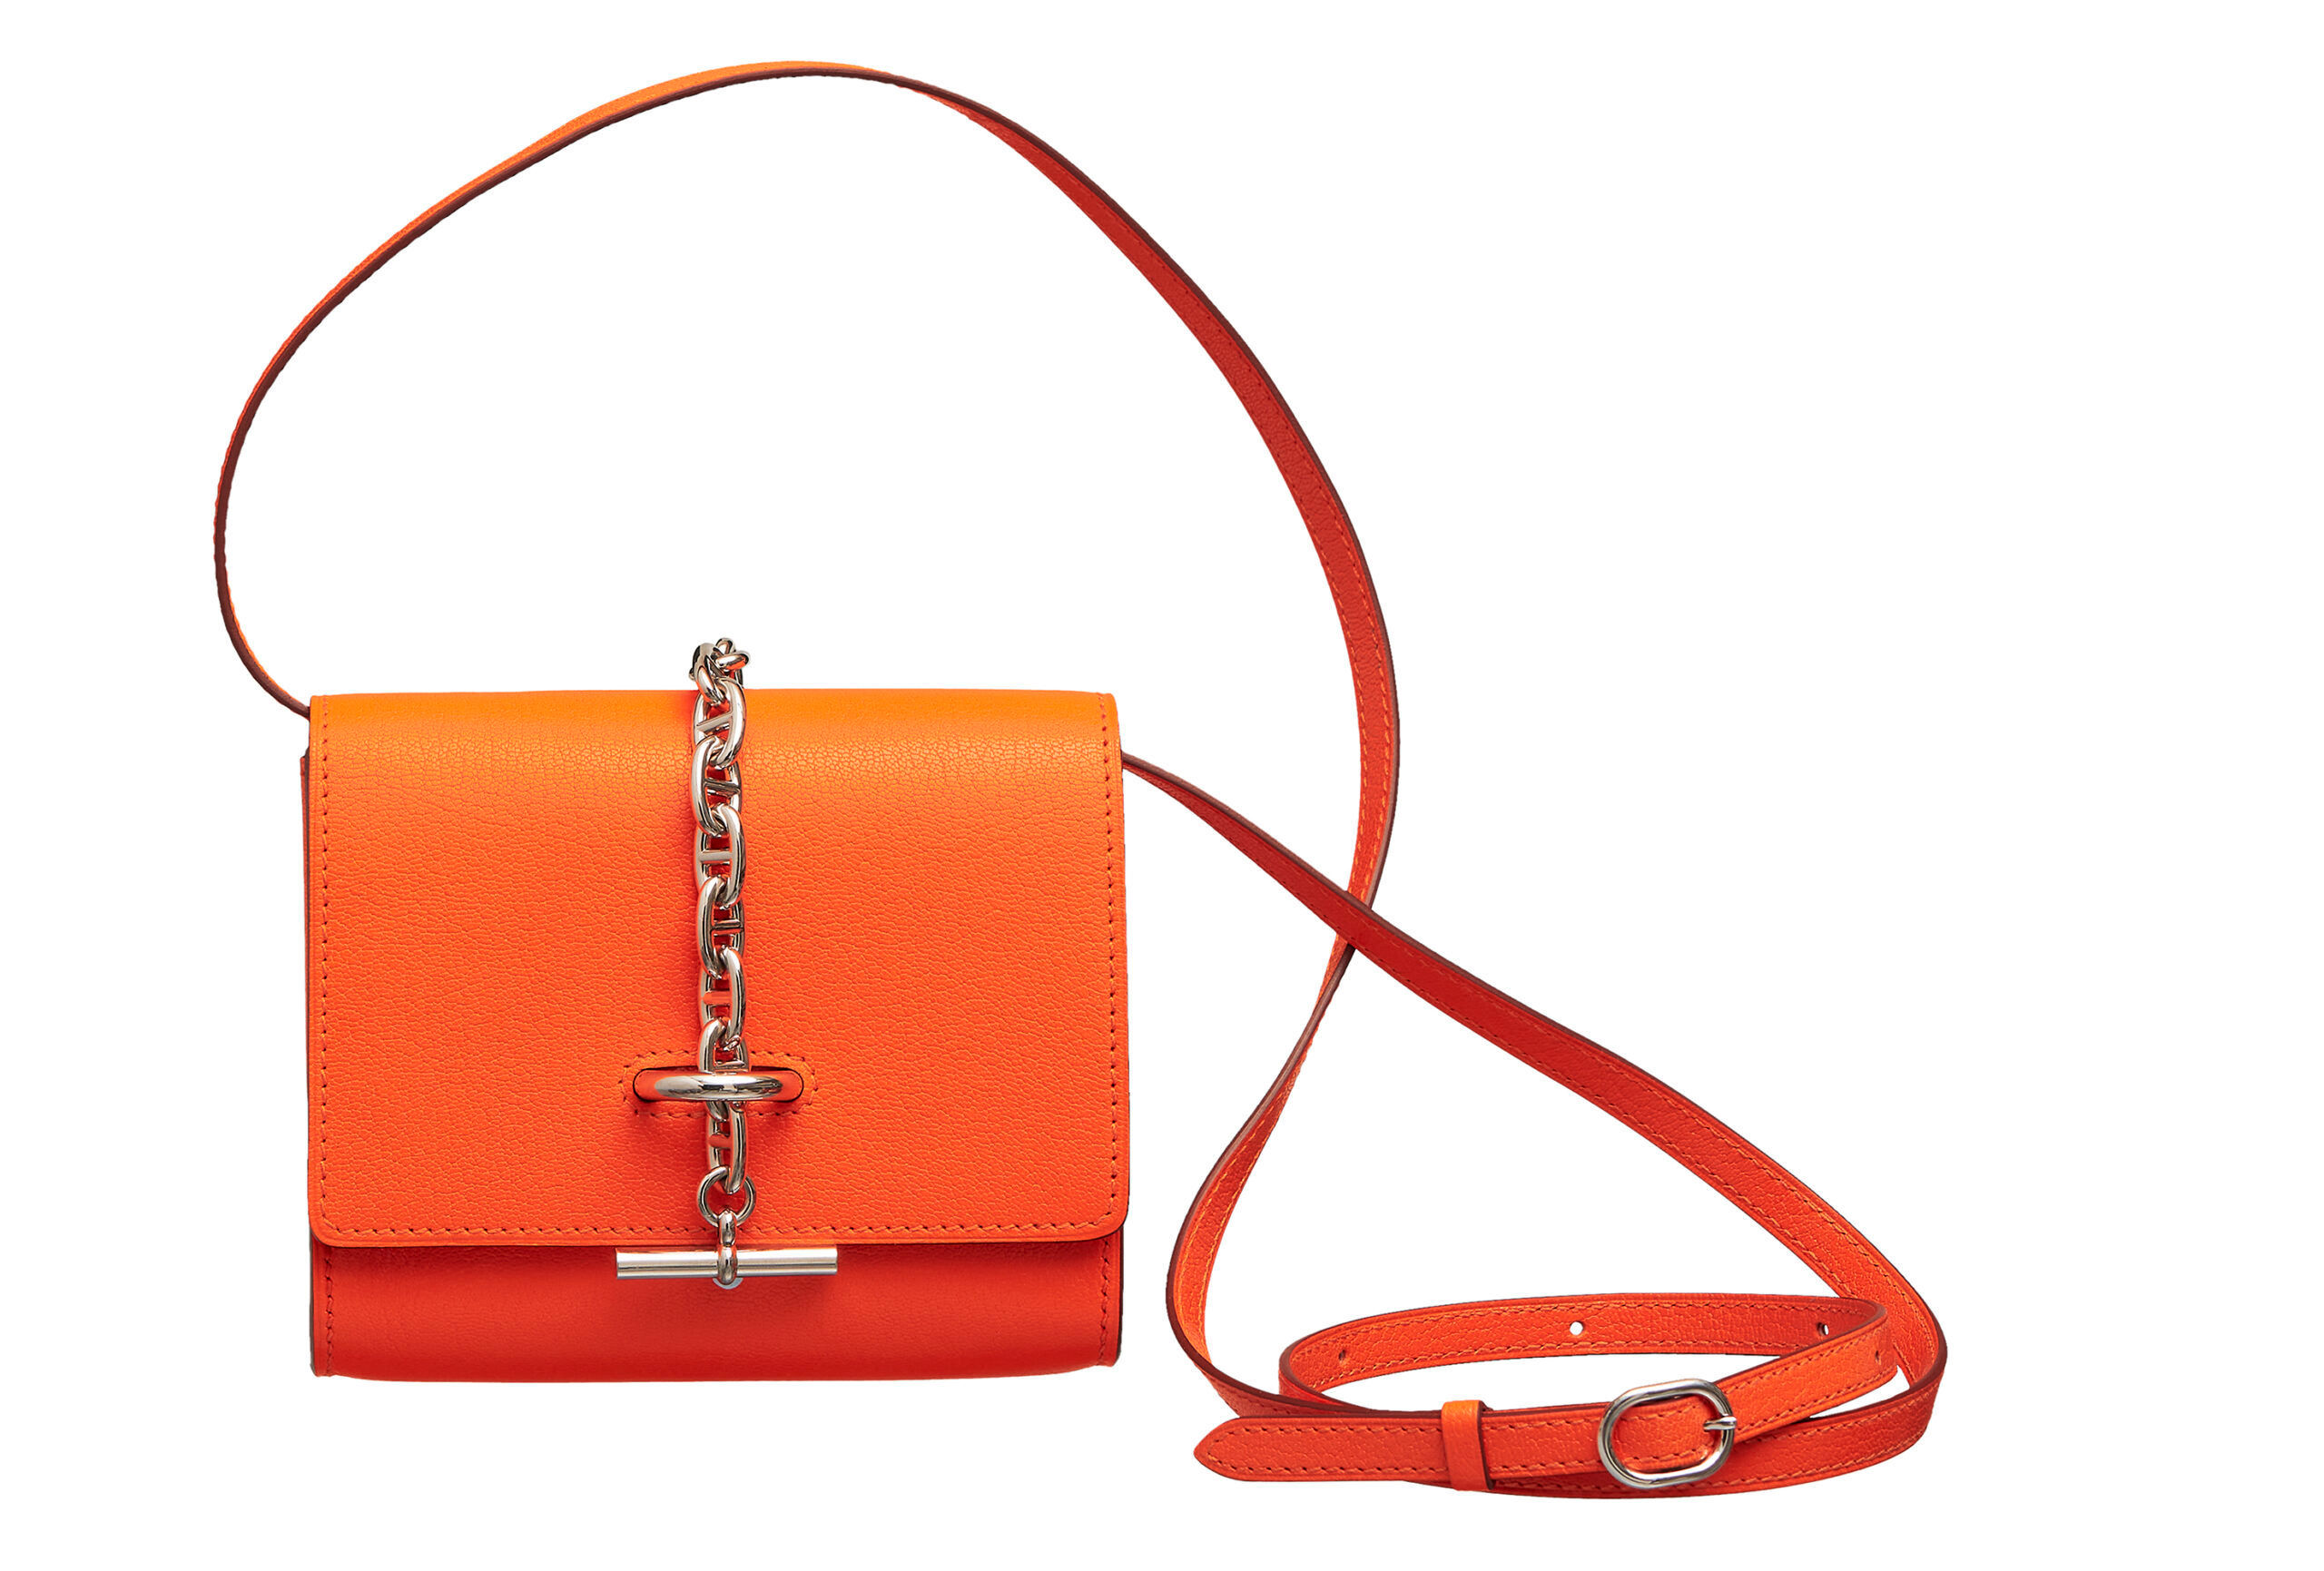 Hermès Objets spring/summer 2020: The standout accessories in the latest  collection